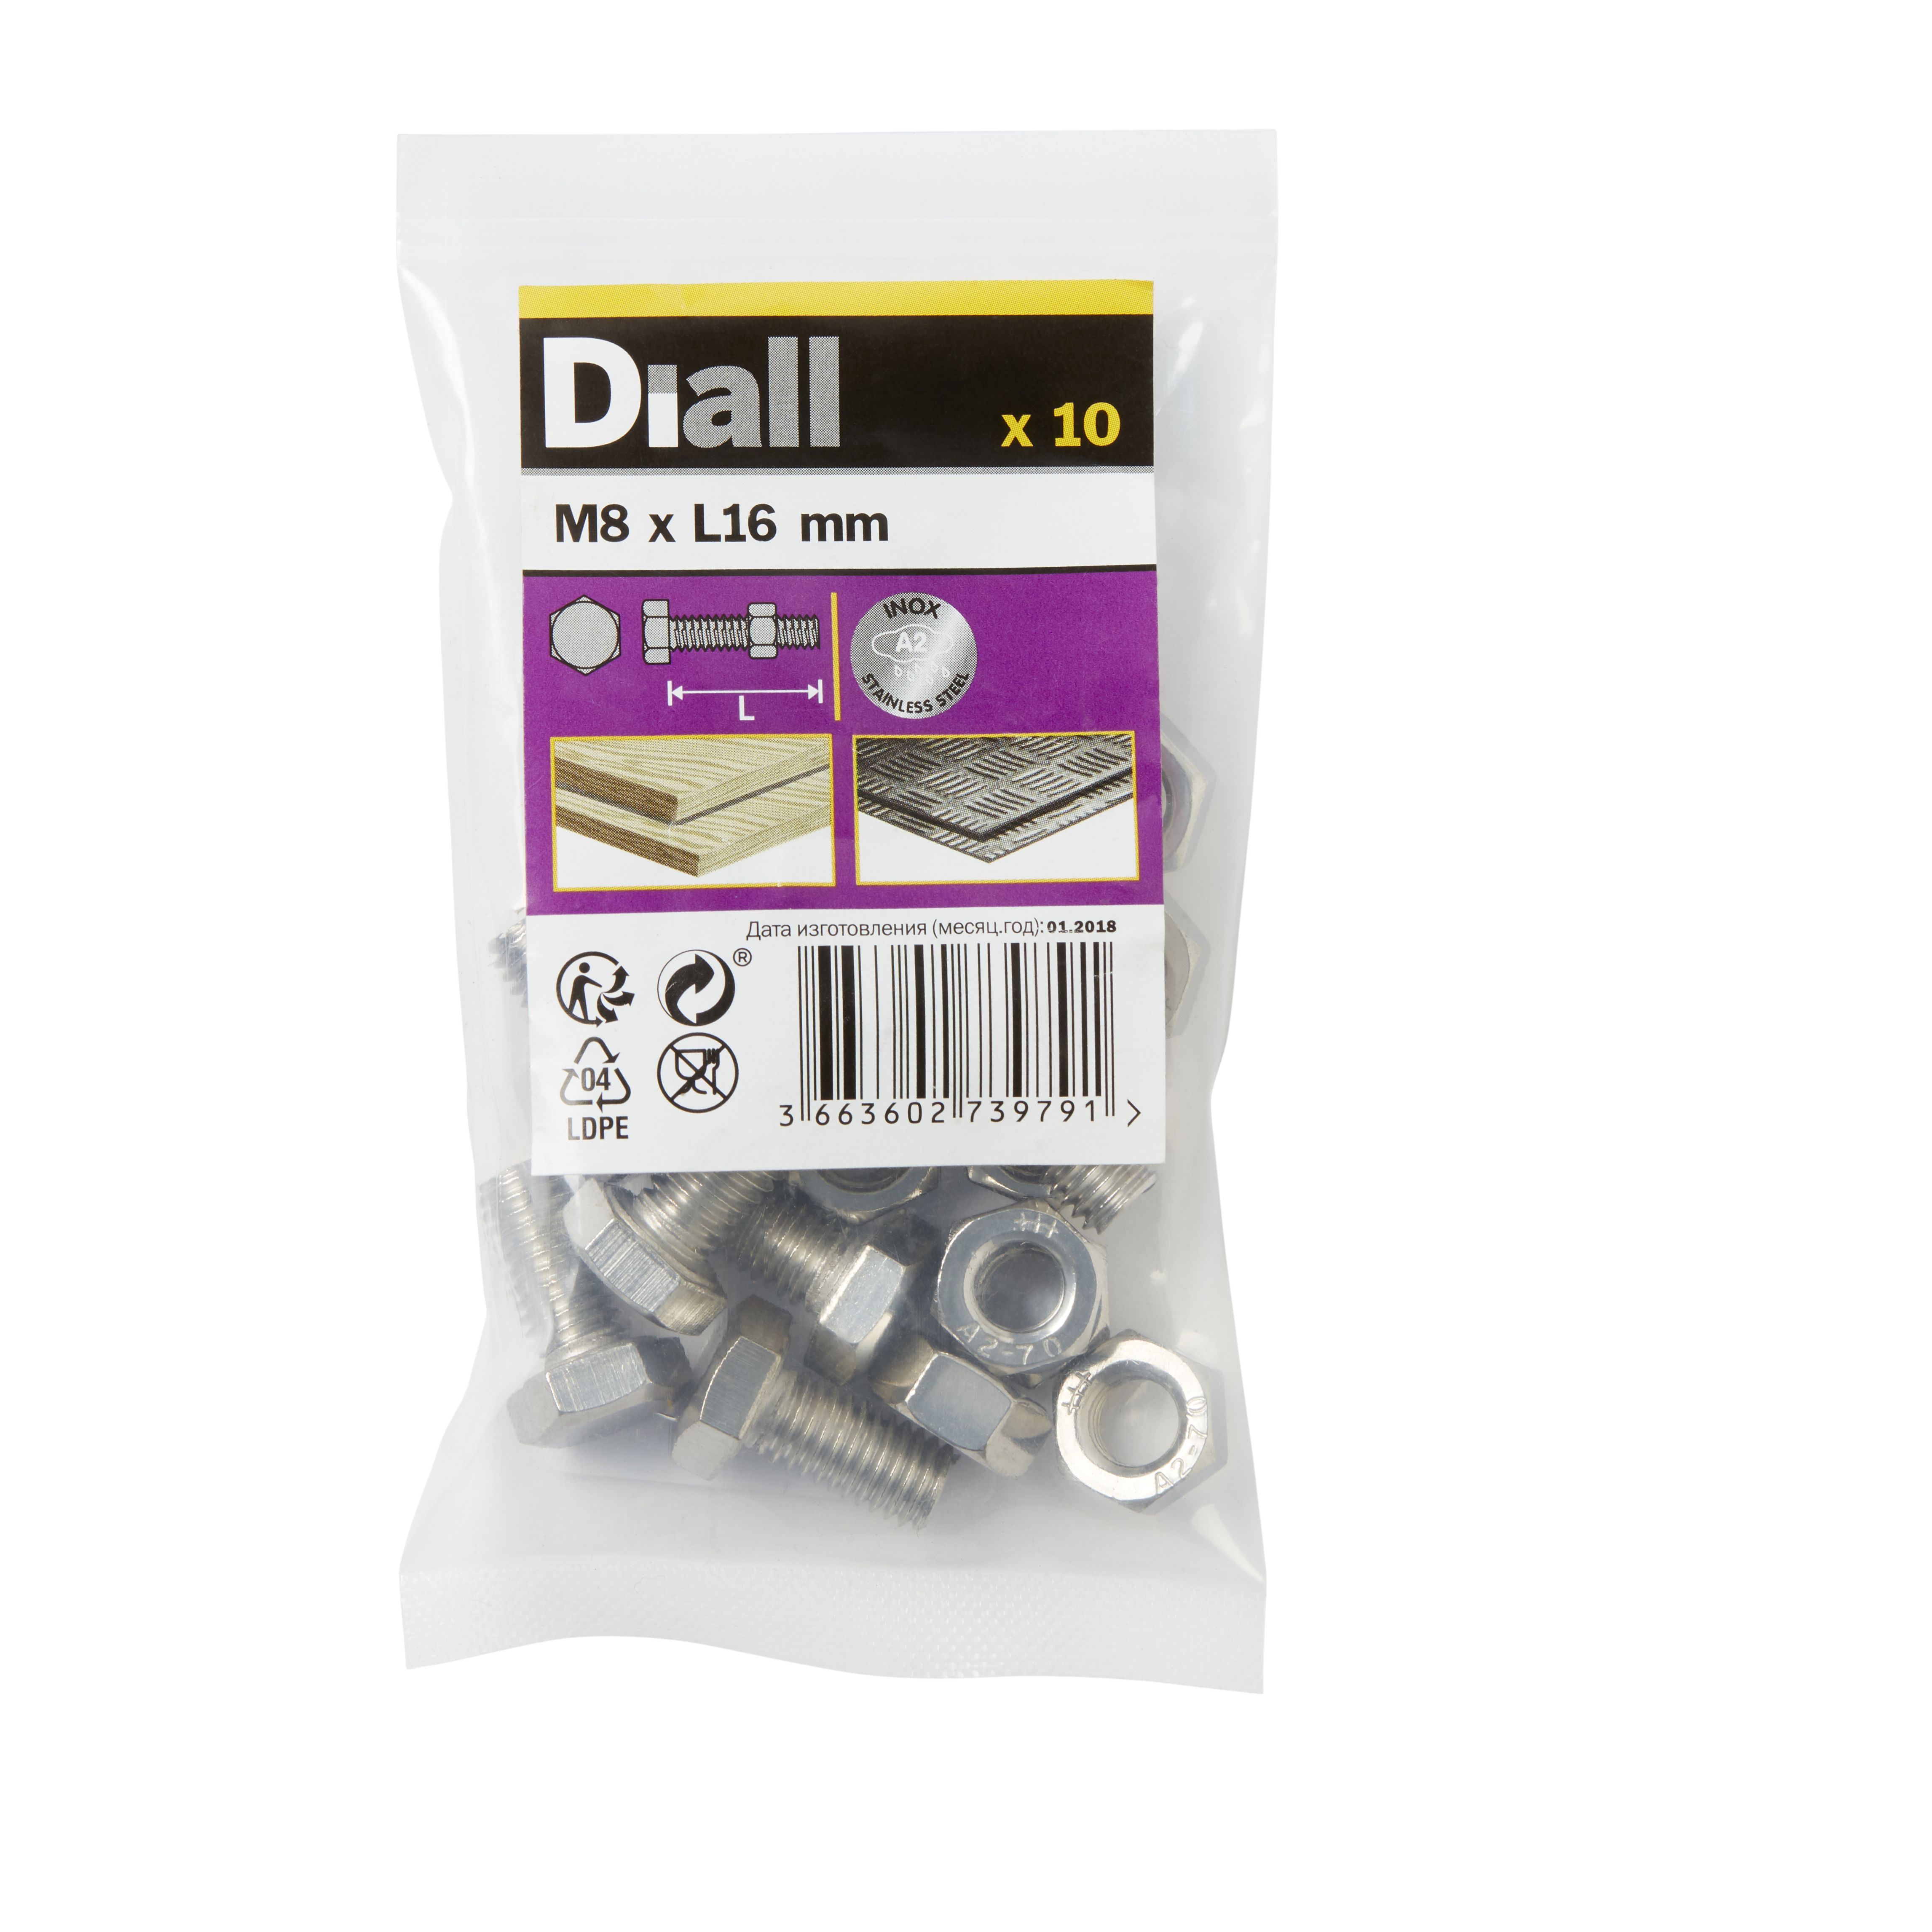 Diall M8 Hex A2 stainless steel Bolt & nut (L)70mm (Dia)8mm, Pack